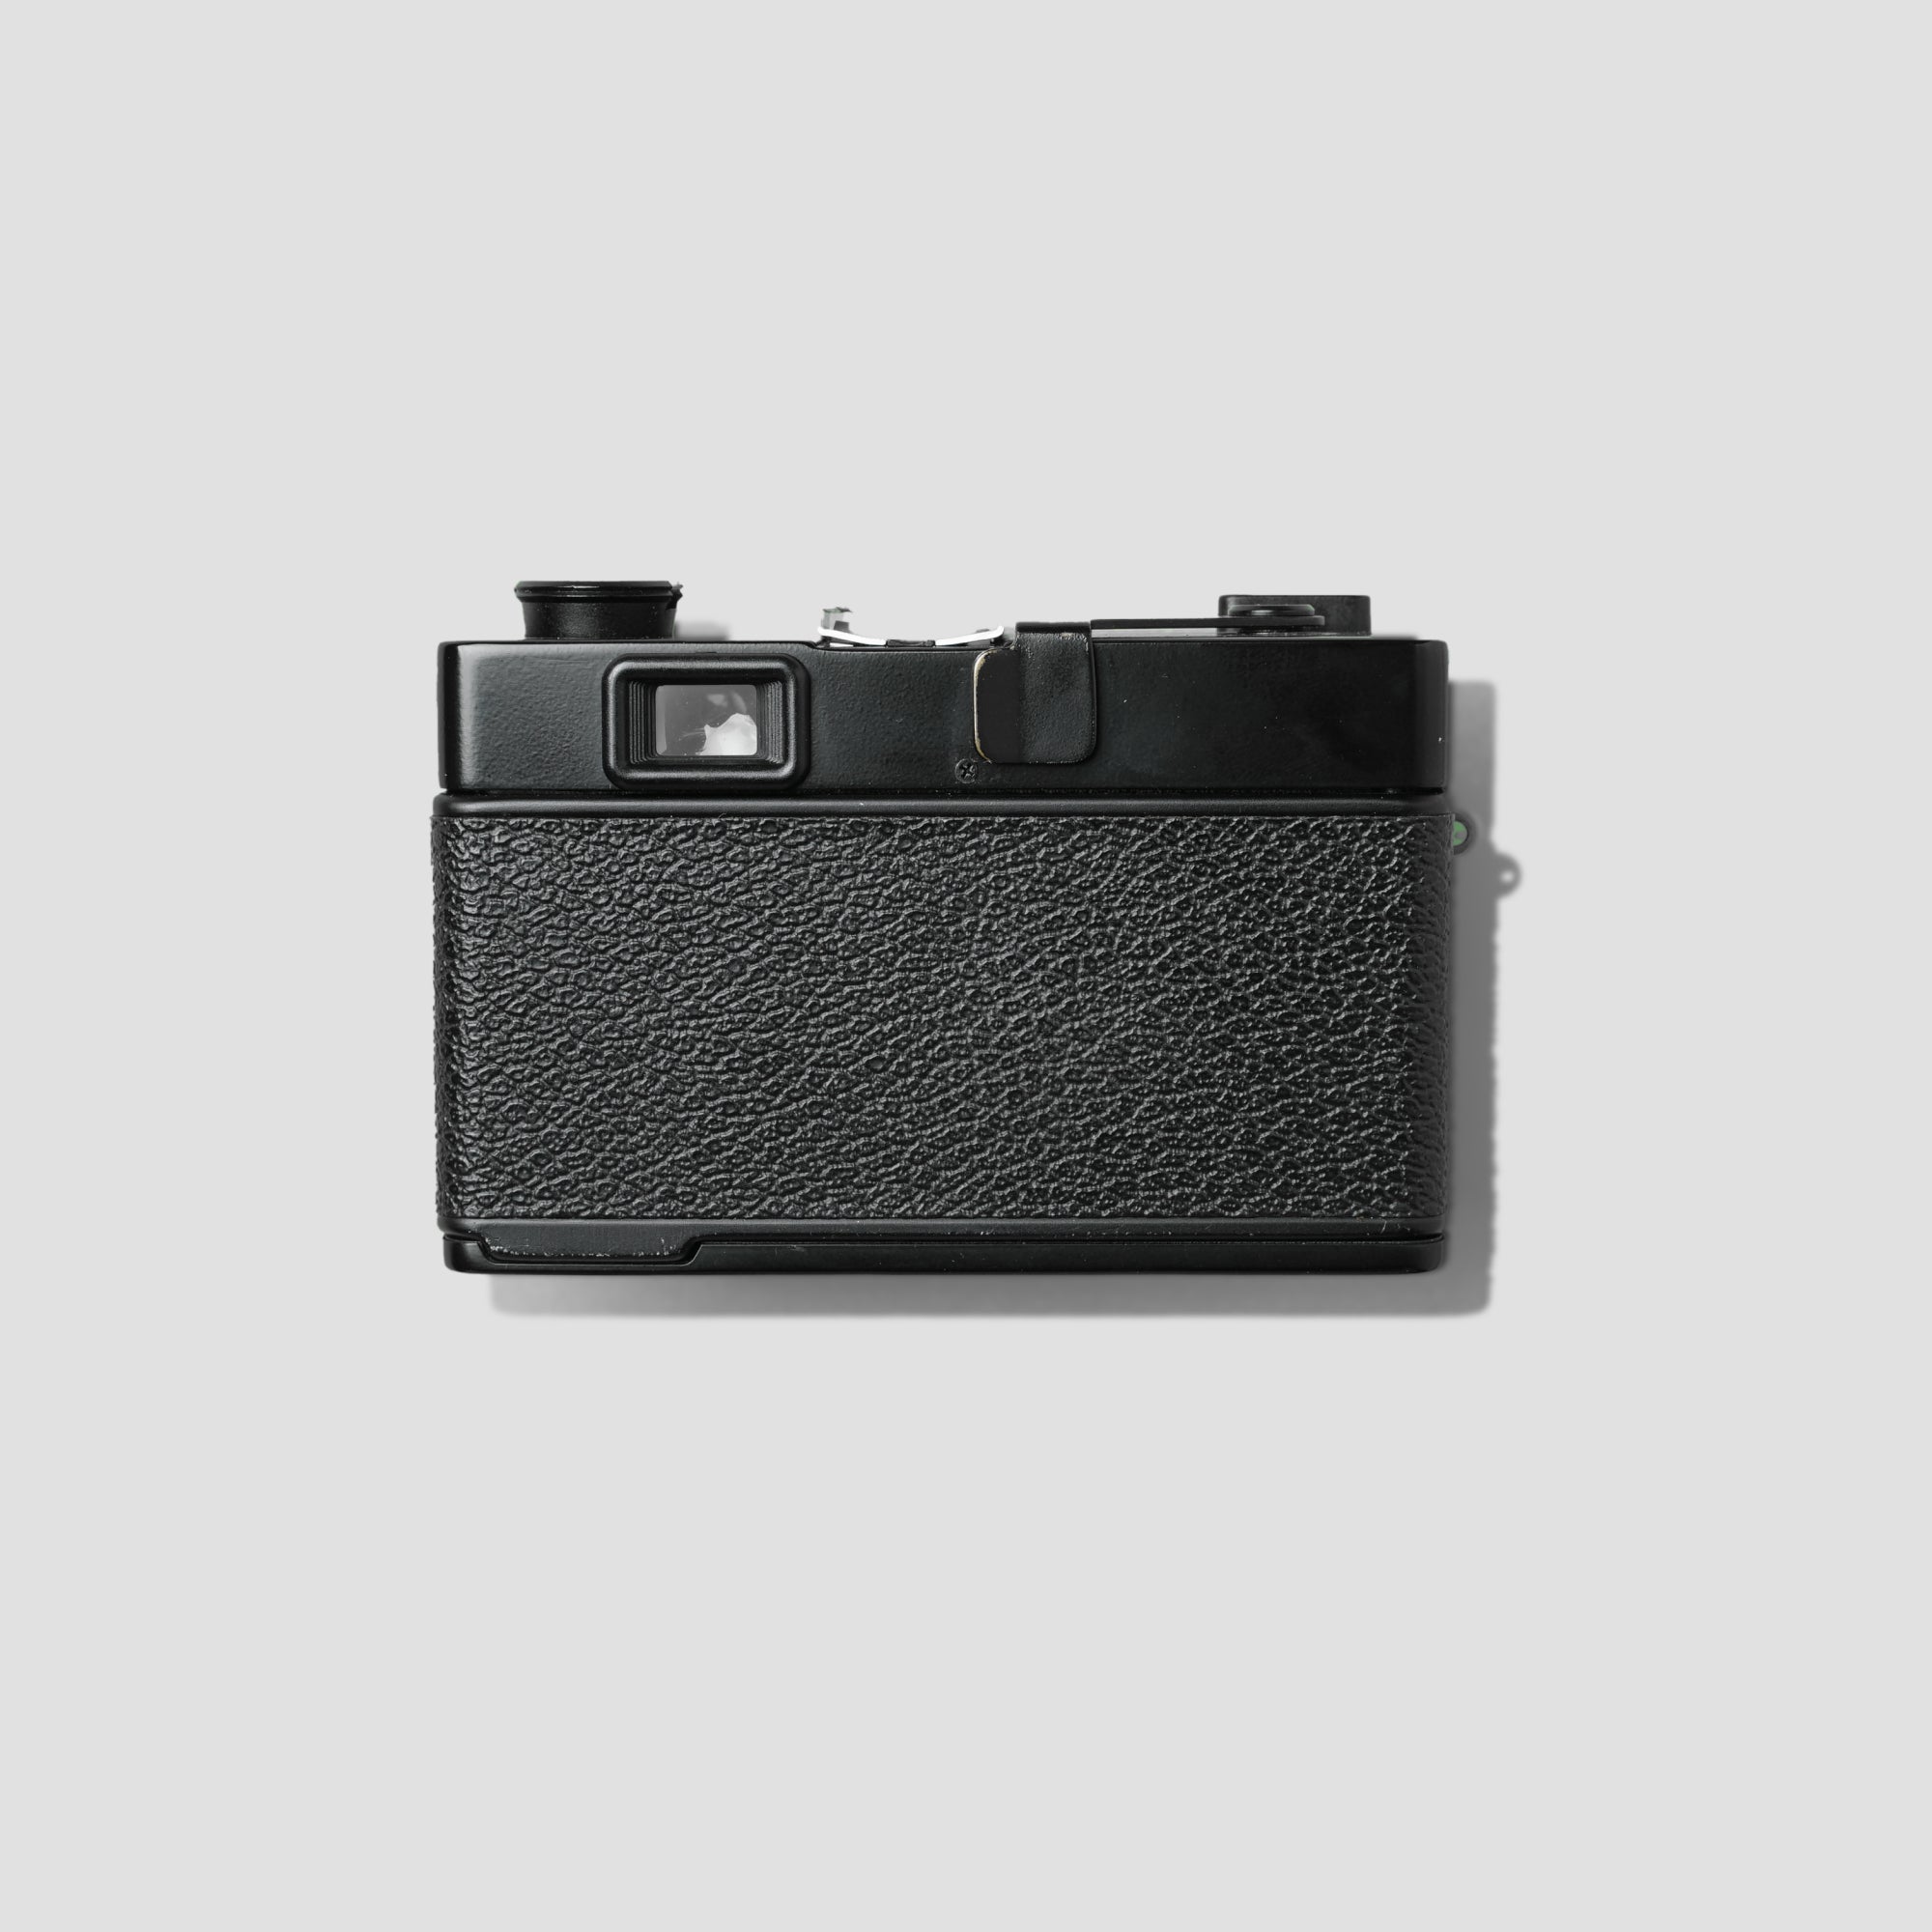 Buy Rollei XF 35 now at Analogue Amsterdam